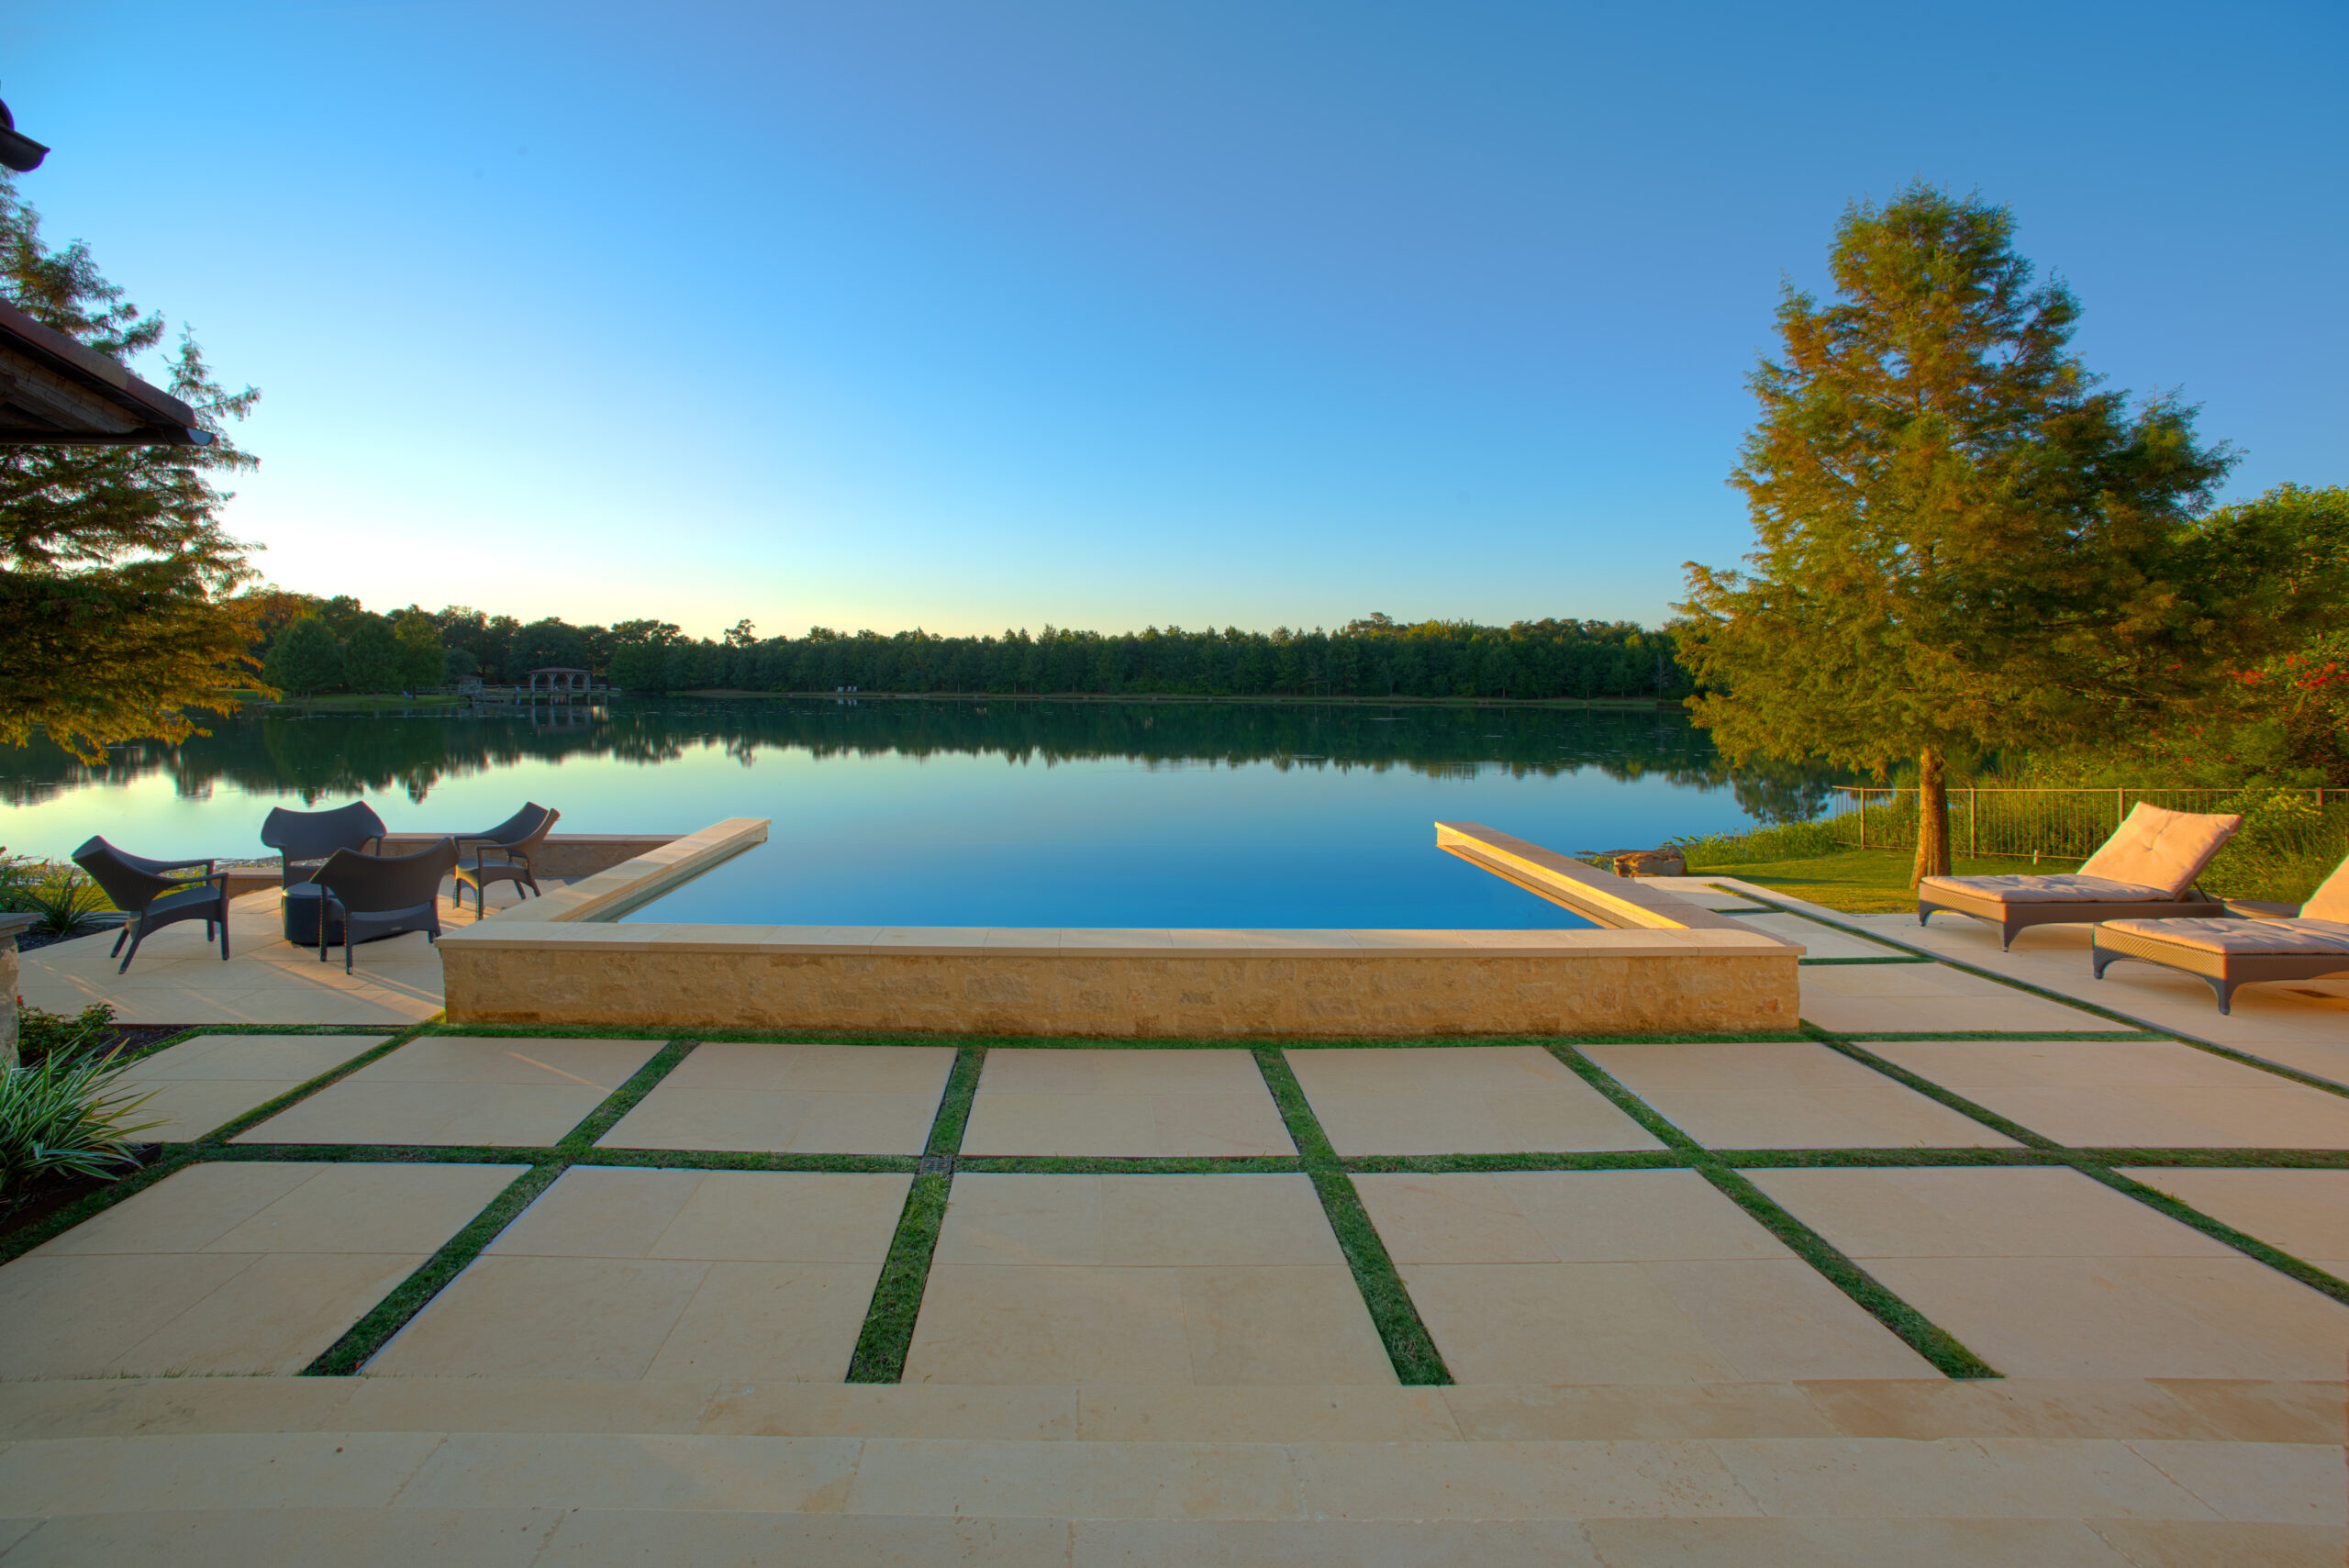 An infinity pool designed and built by Prewett, Read & Associates overlooking a lake.